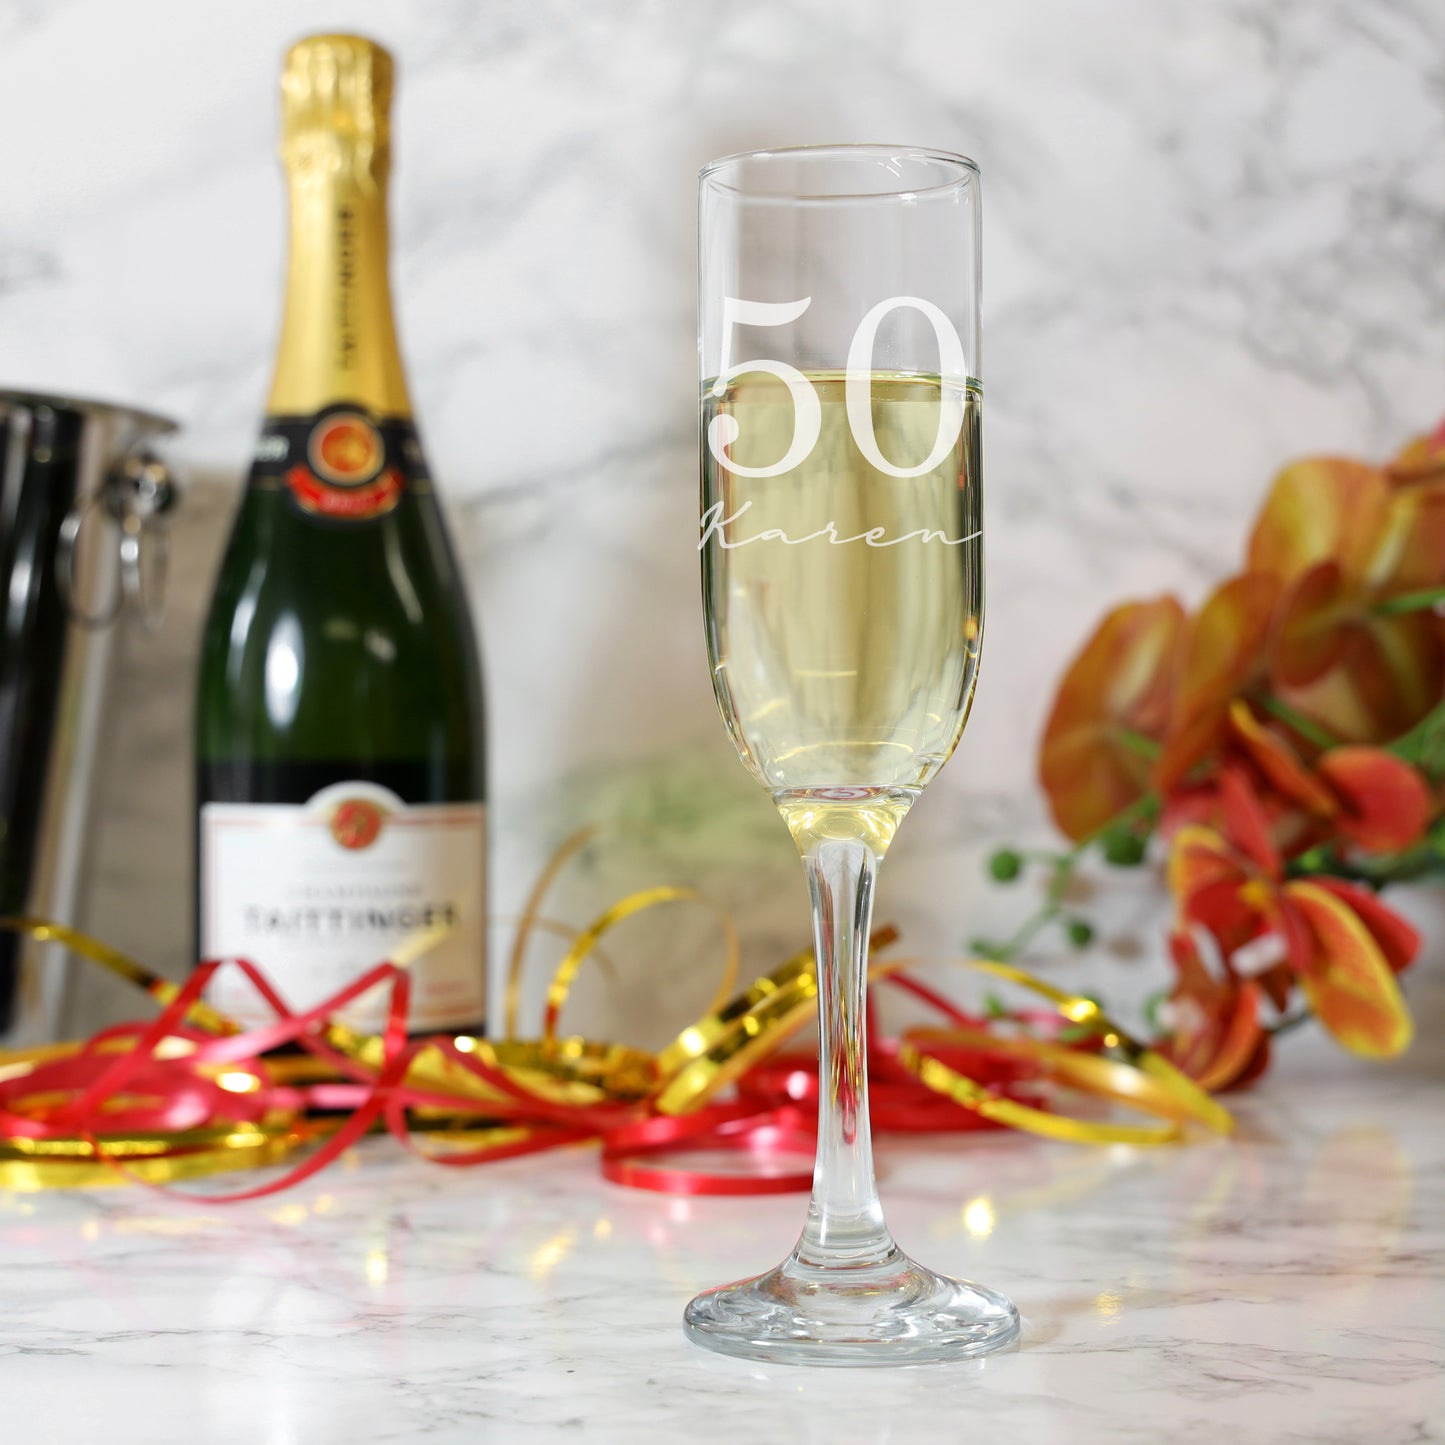 Personalised Engraved Big Birthday Champagne Flute Filled Occasion Glass  - Always Looking Good -   